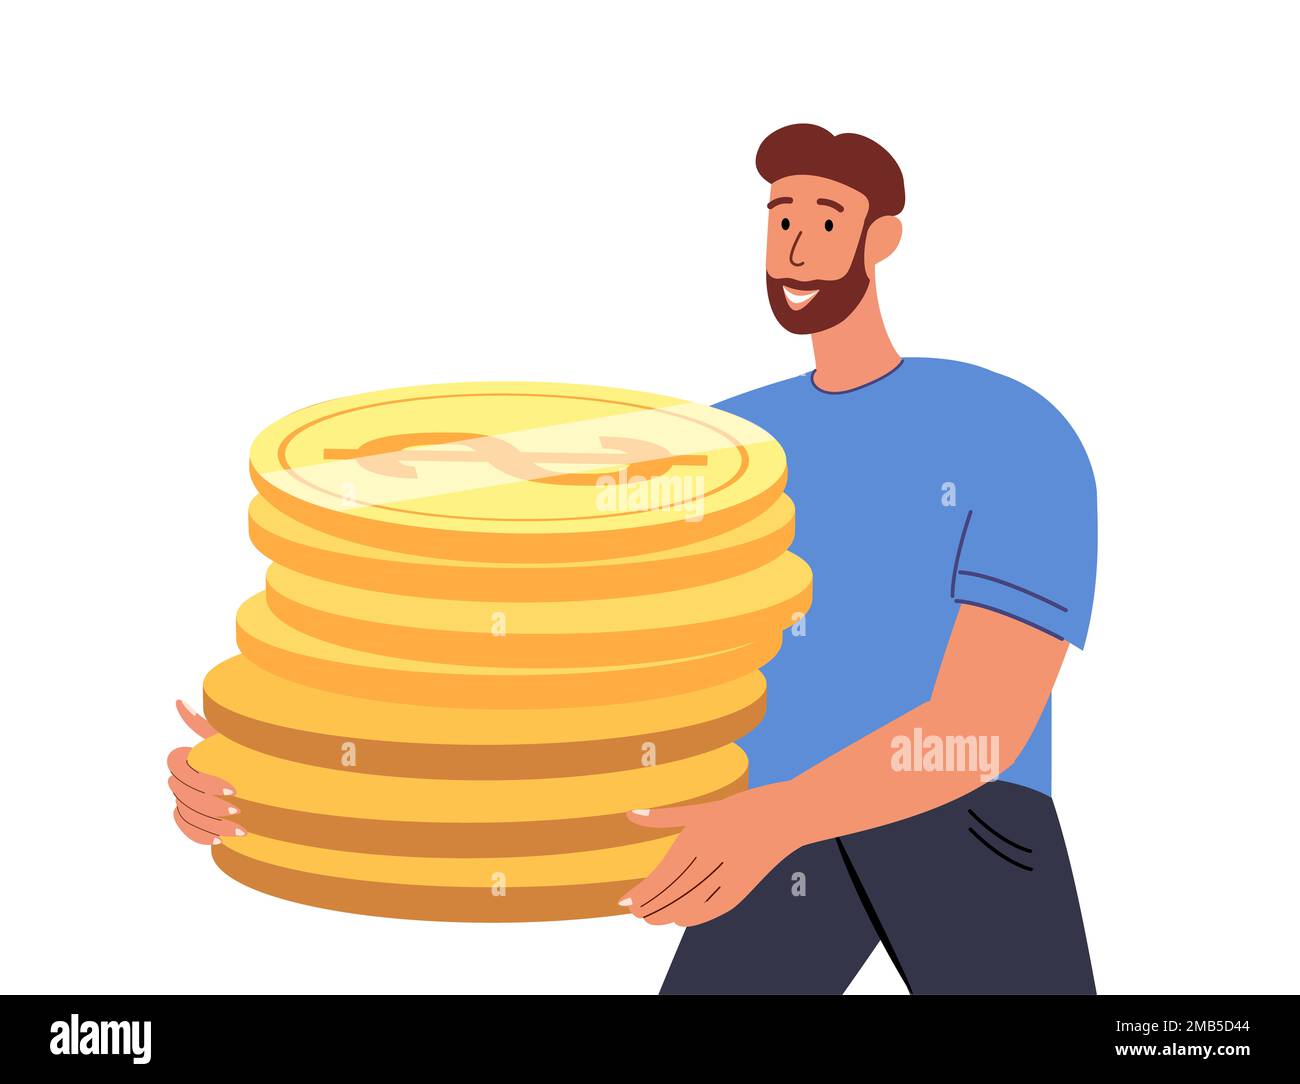 Happy Smiling Young Male Character Holding Pile of Huge Golden Coins.Concept of Financial Wealth,Money Savings and Accumulation,Savings,Wealthy Life,J Stock Photo